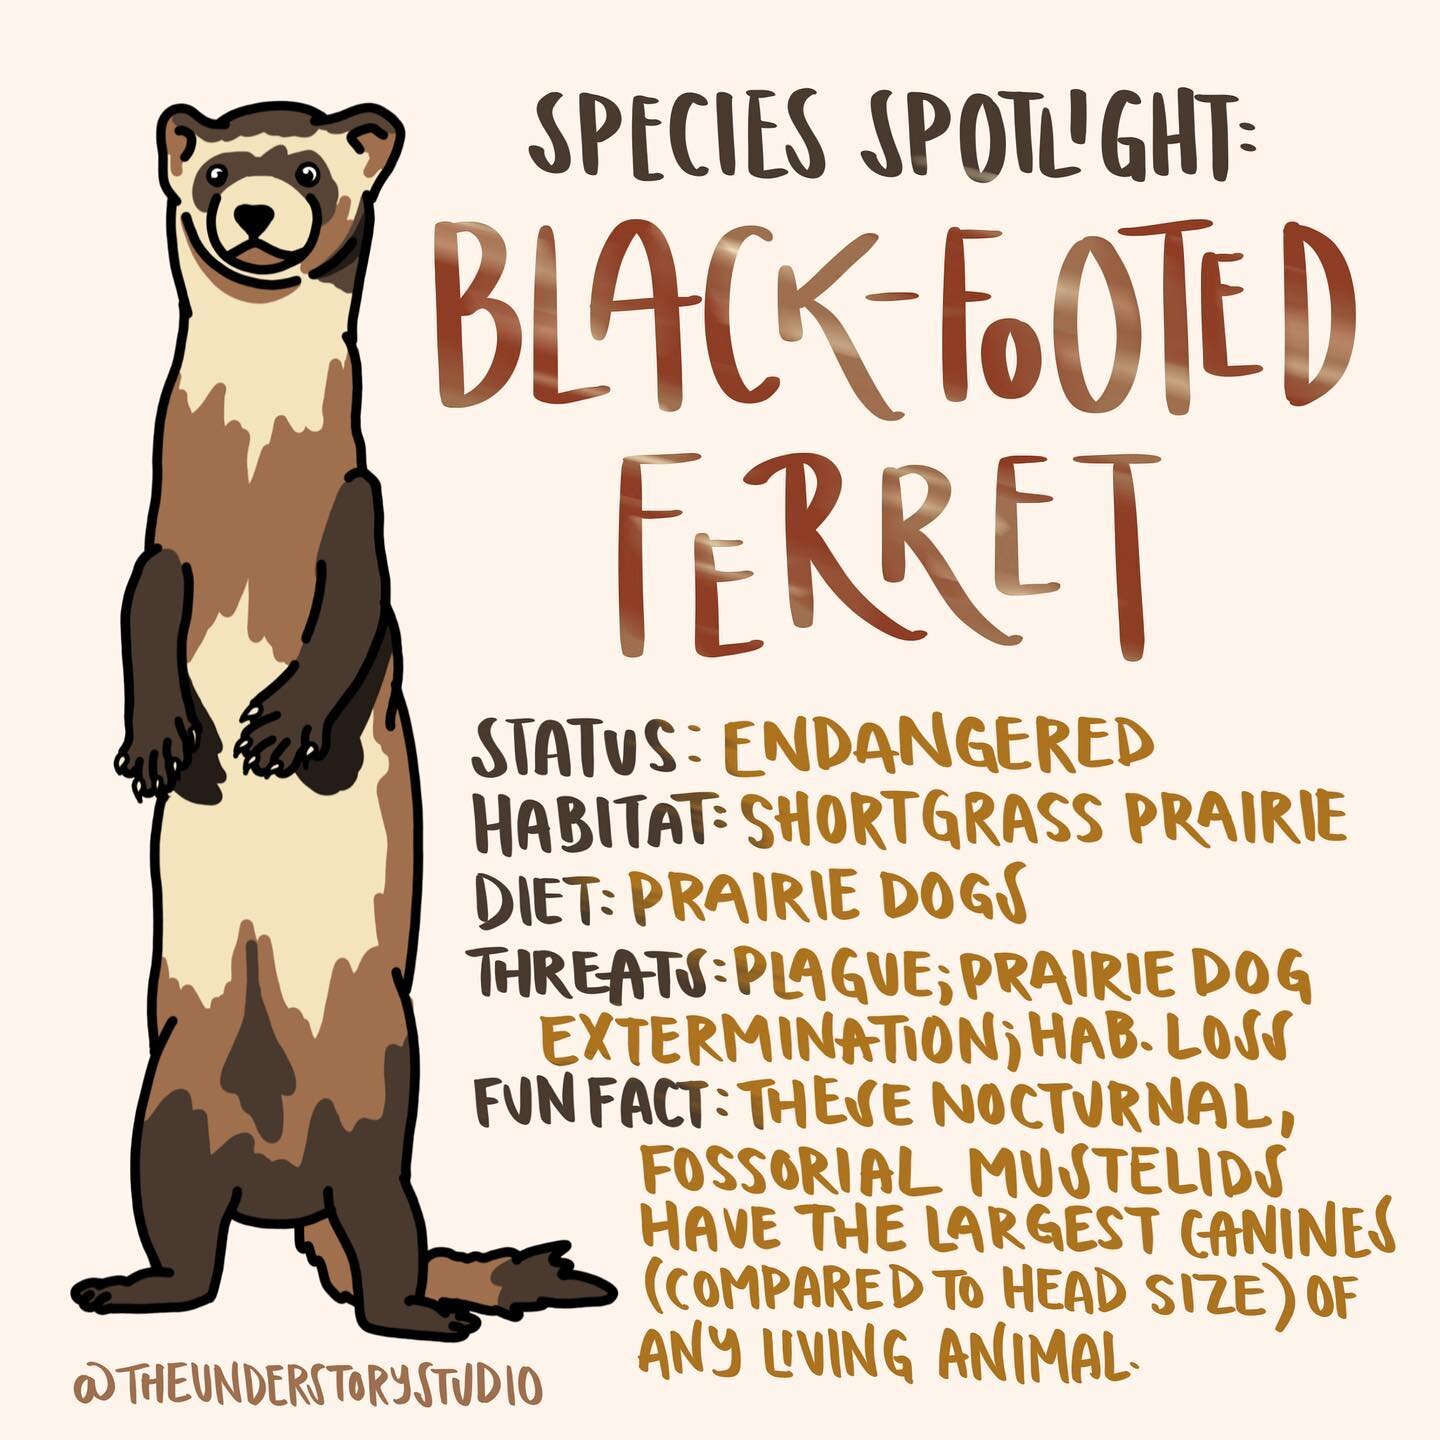 Happy #endangeredspeciesday everyone! I am gonna be spending the day with the Black Footed Ferrets (BFFs), one of my favorite species with an amazing conservation story. 

BFFs are the most endangered mammal in North America, and were thought to be e